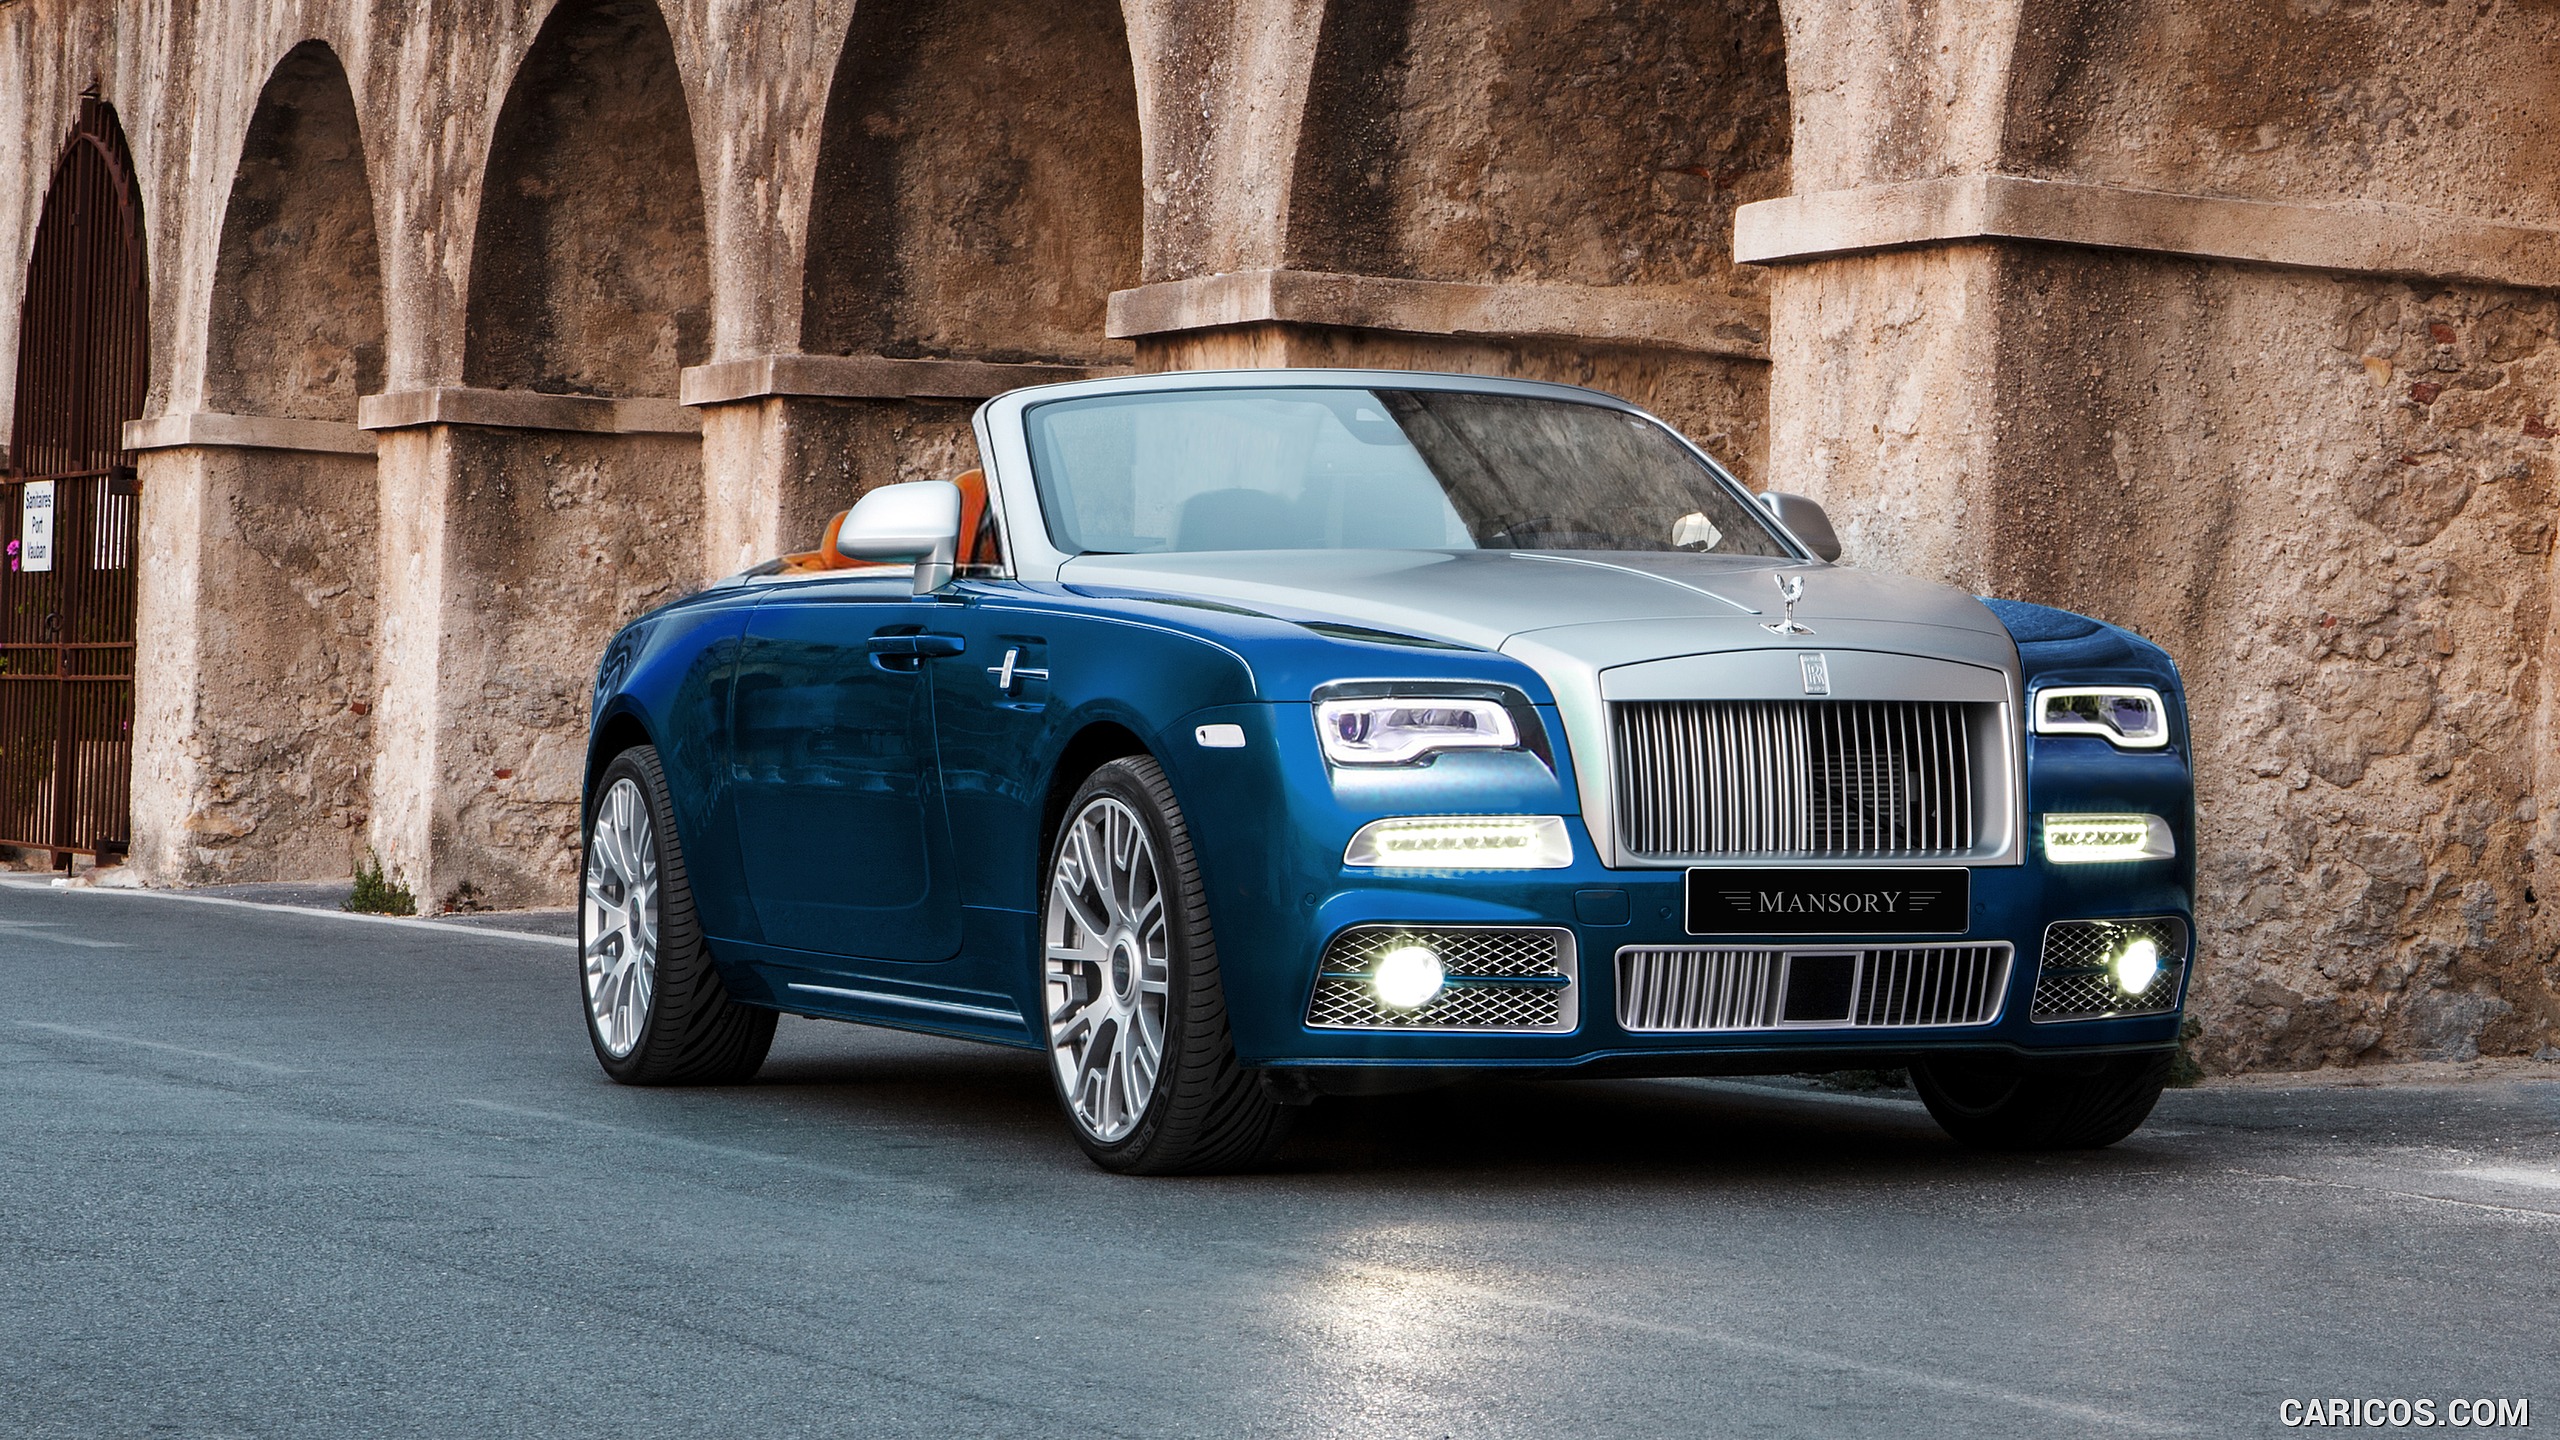 2017 MANSORY Rolls-Royce Dawn - Front, #1 of 3